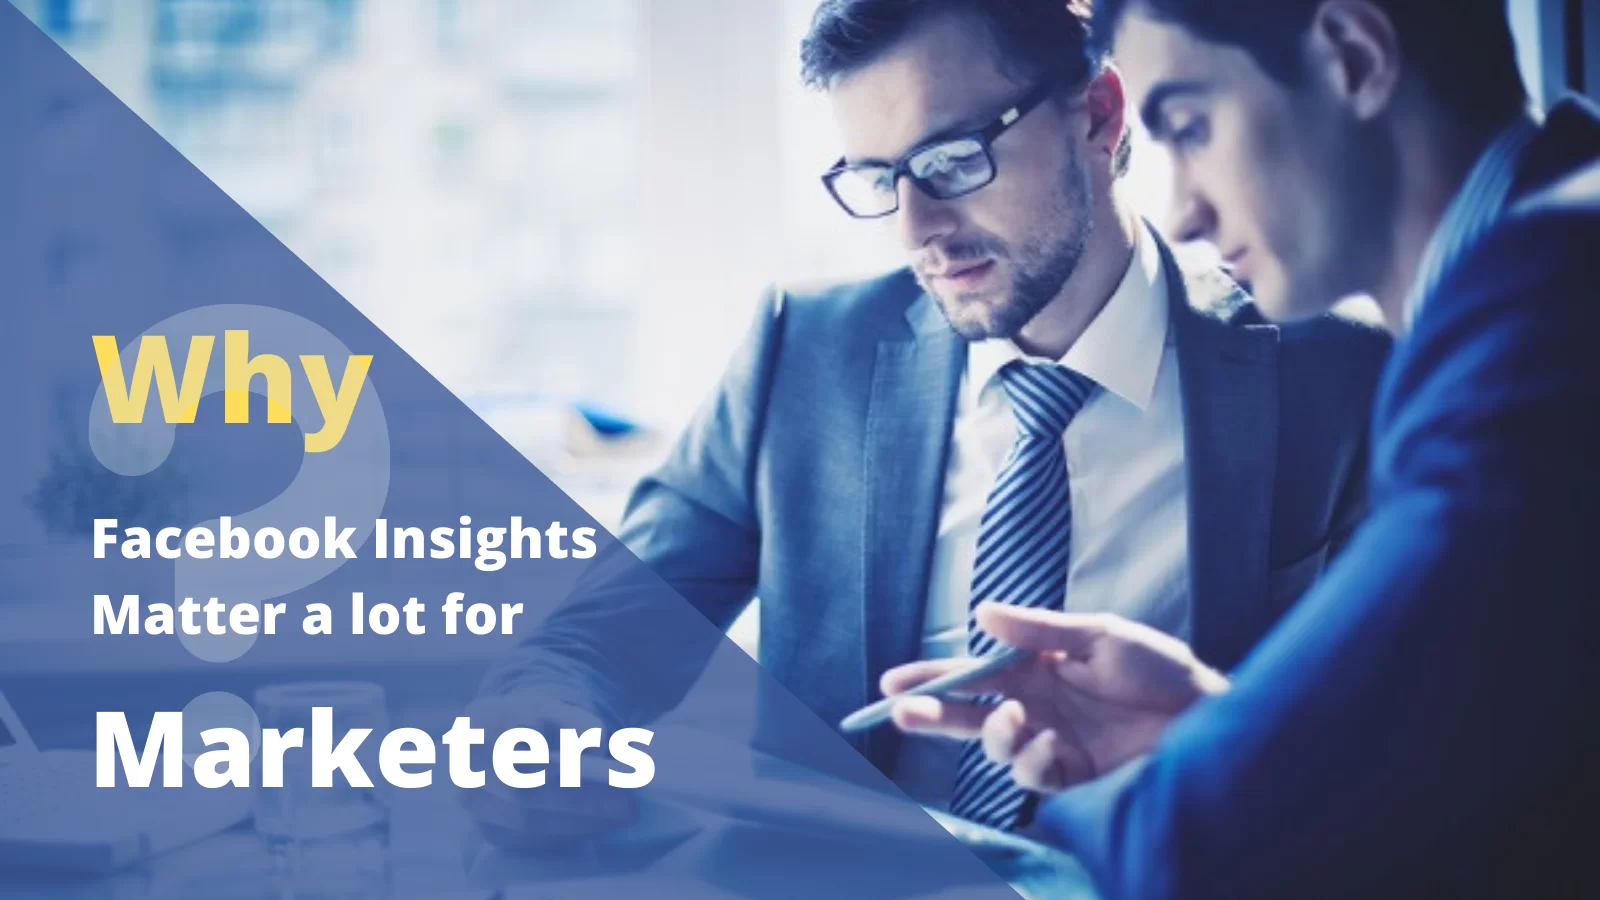 Facebook Insights Matter a lot for marketers